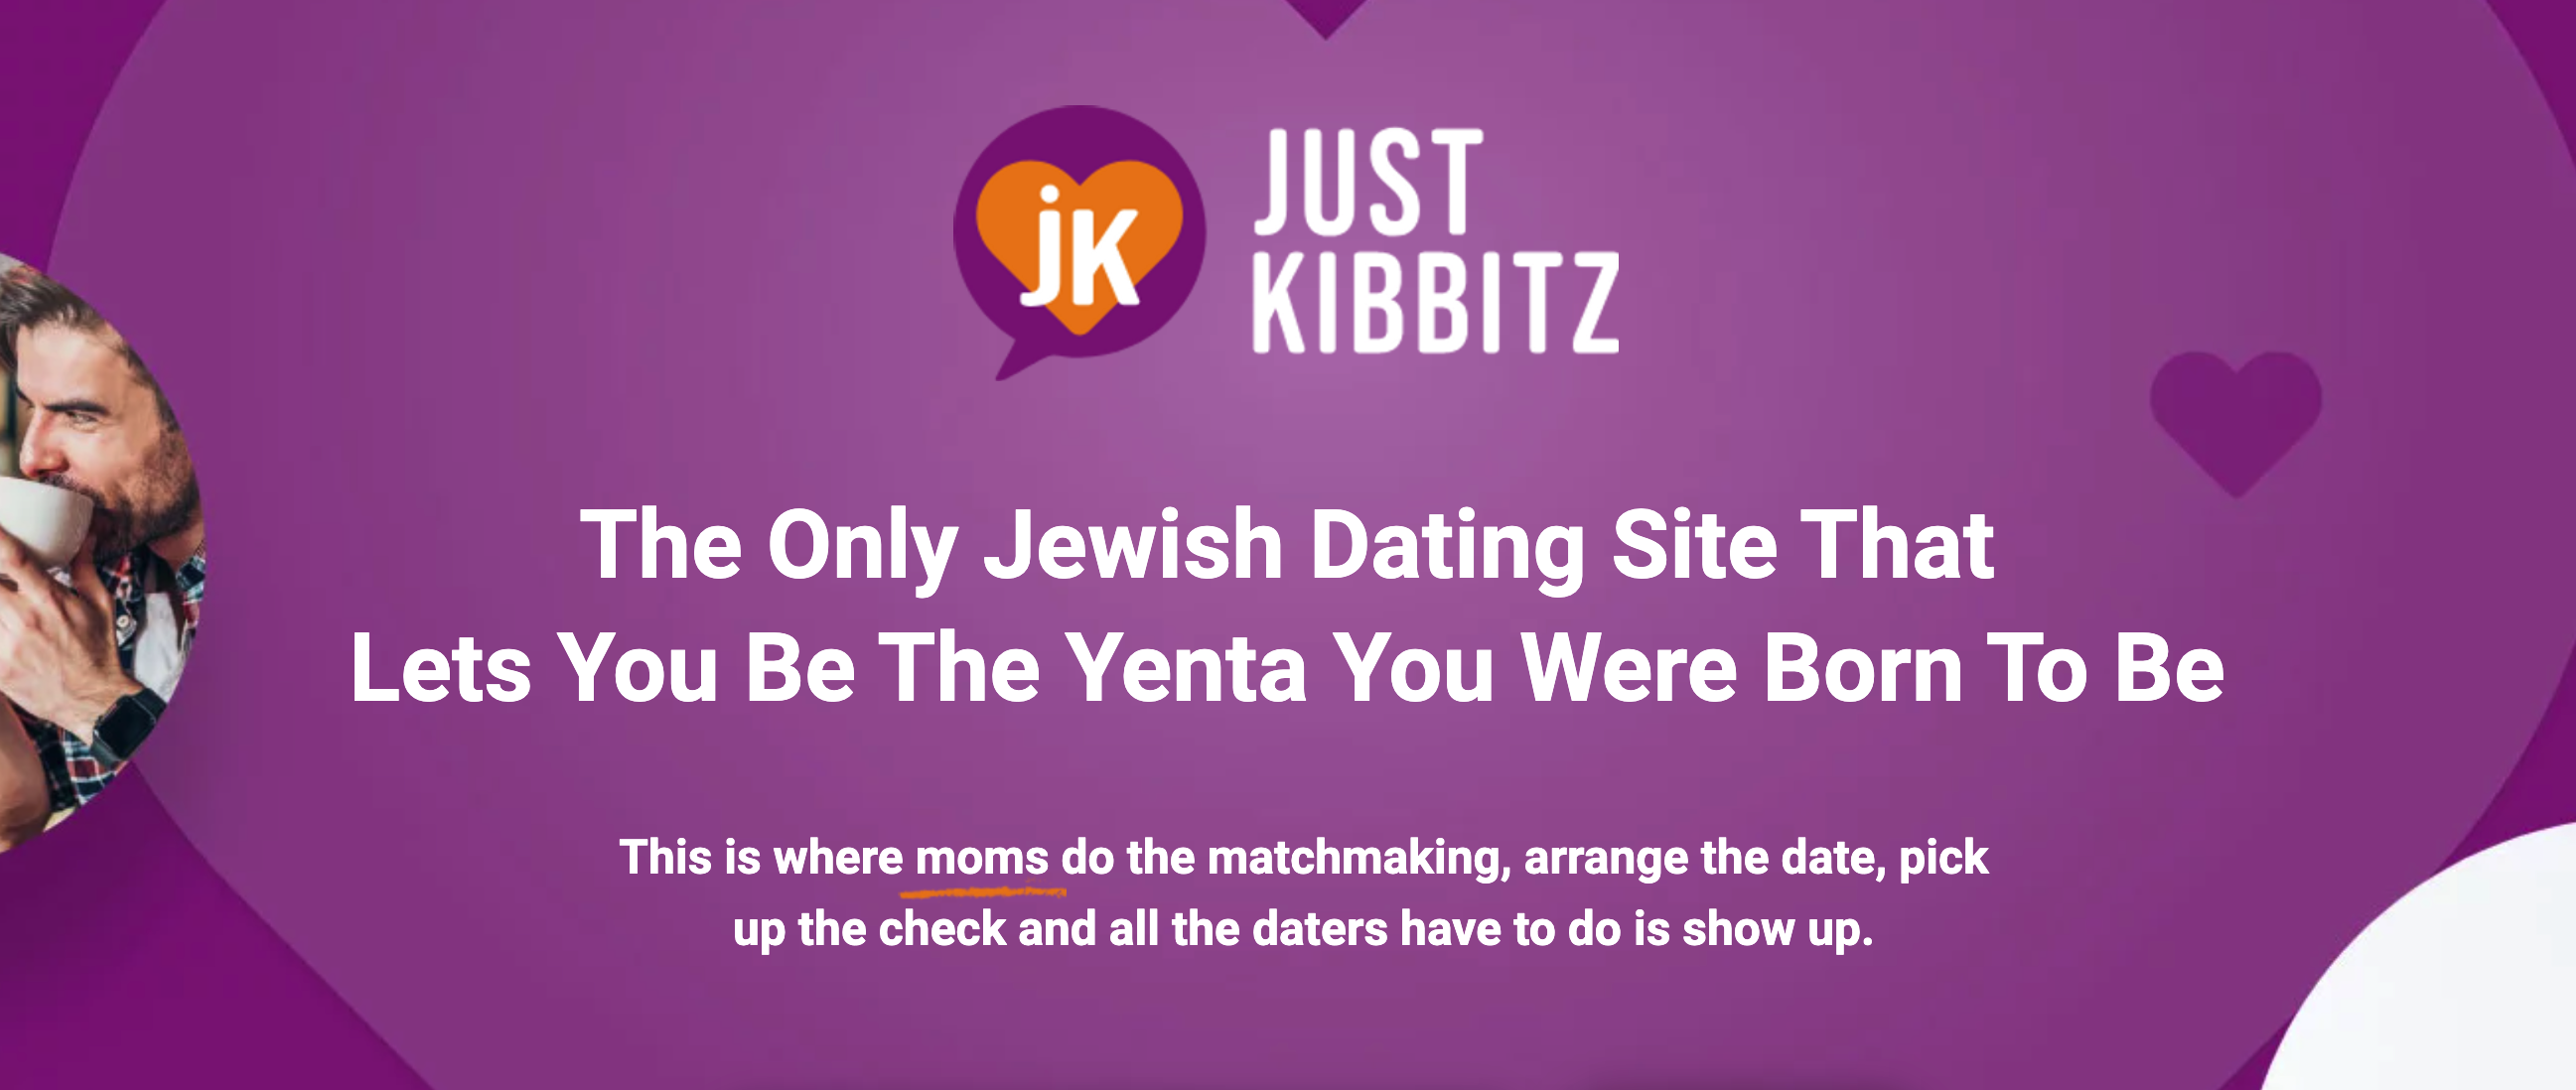 JustKibbitz Empowers Yenta’s to Live Up to Their Matchmaking Potential This Valentine’s Day